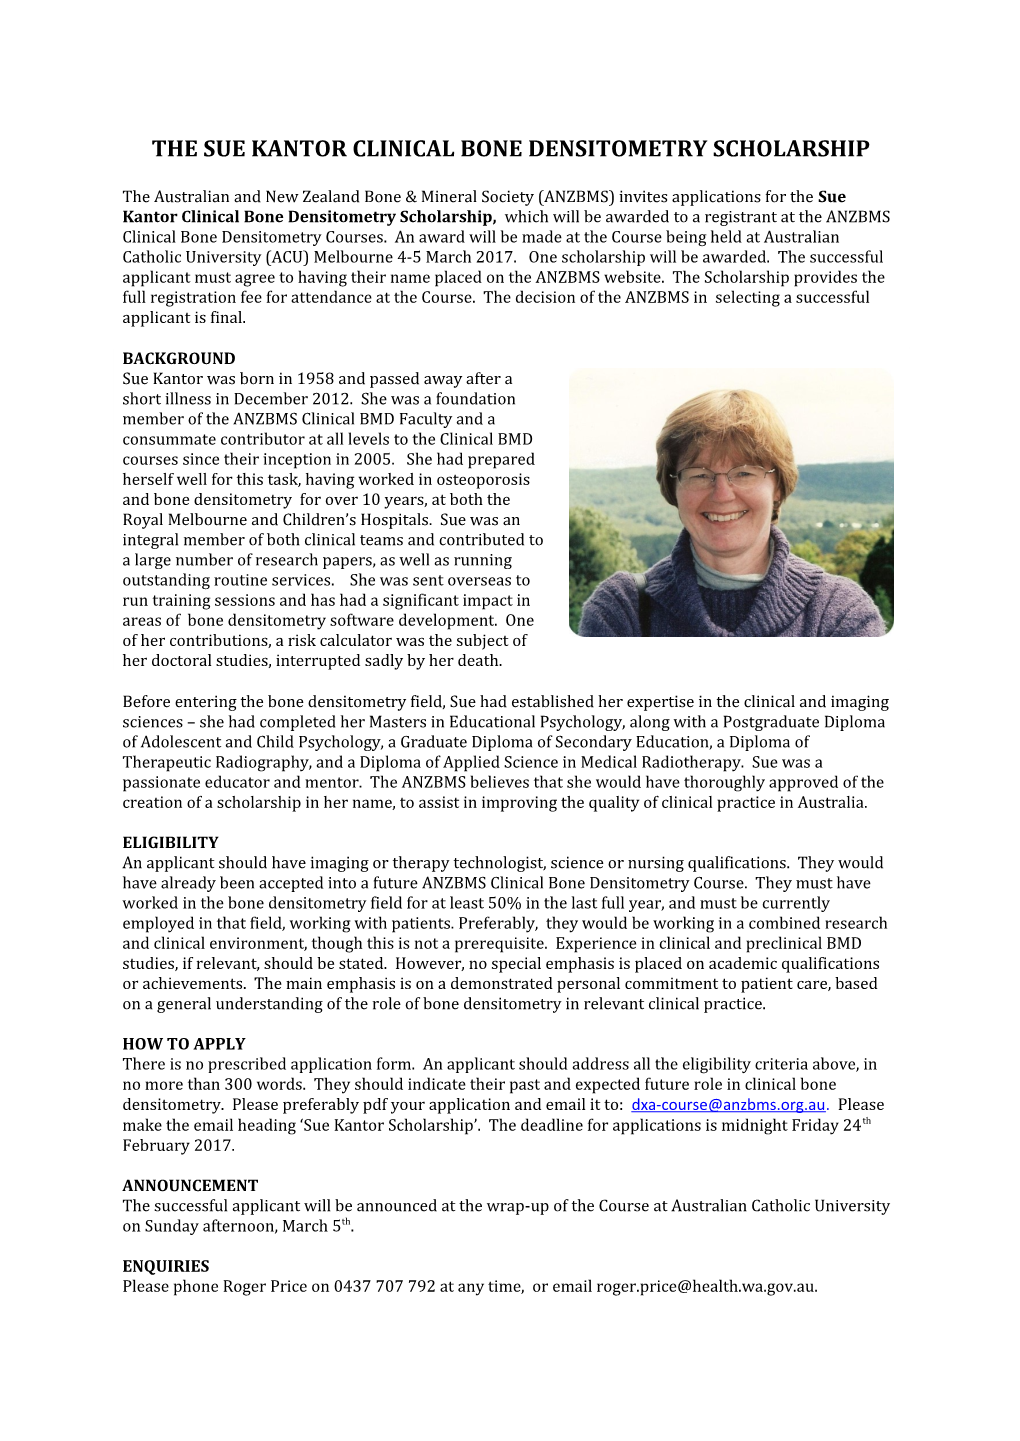 The Sue Kantor Clinical Bone Densitometry Scholarship